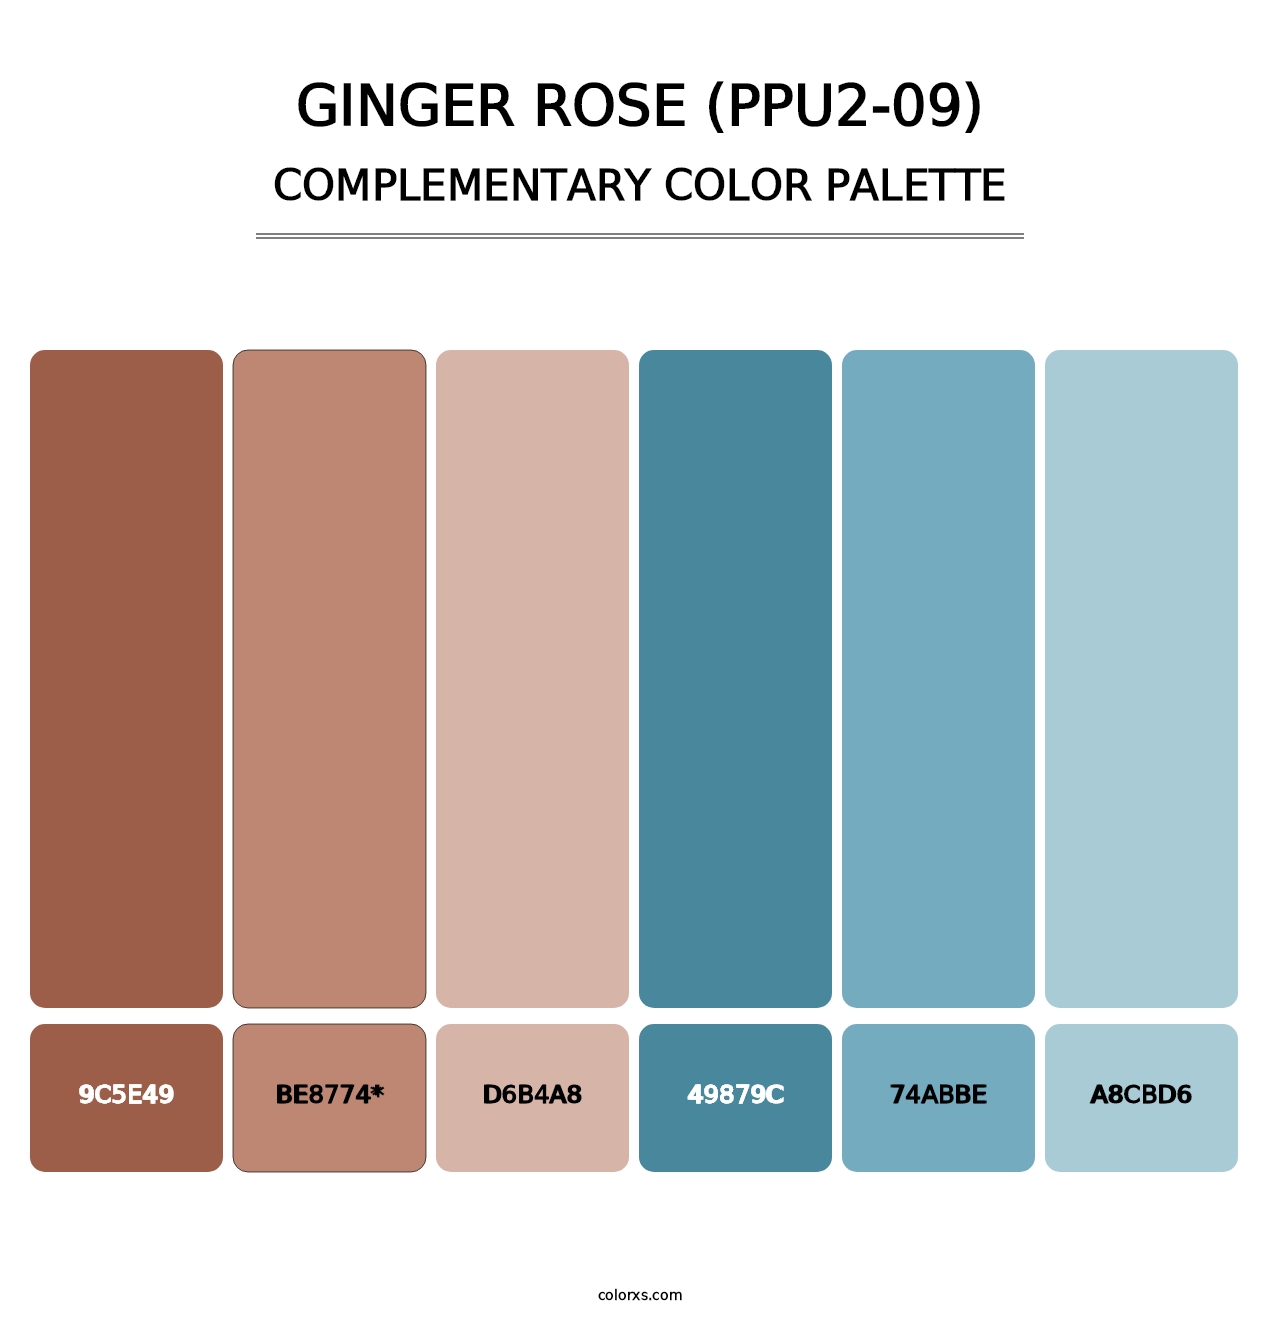 Ginger Rose (PPU2-09) - Complementary Color Palette